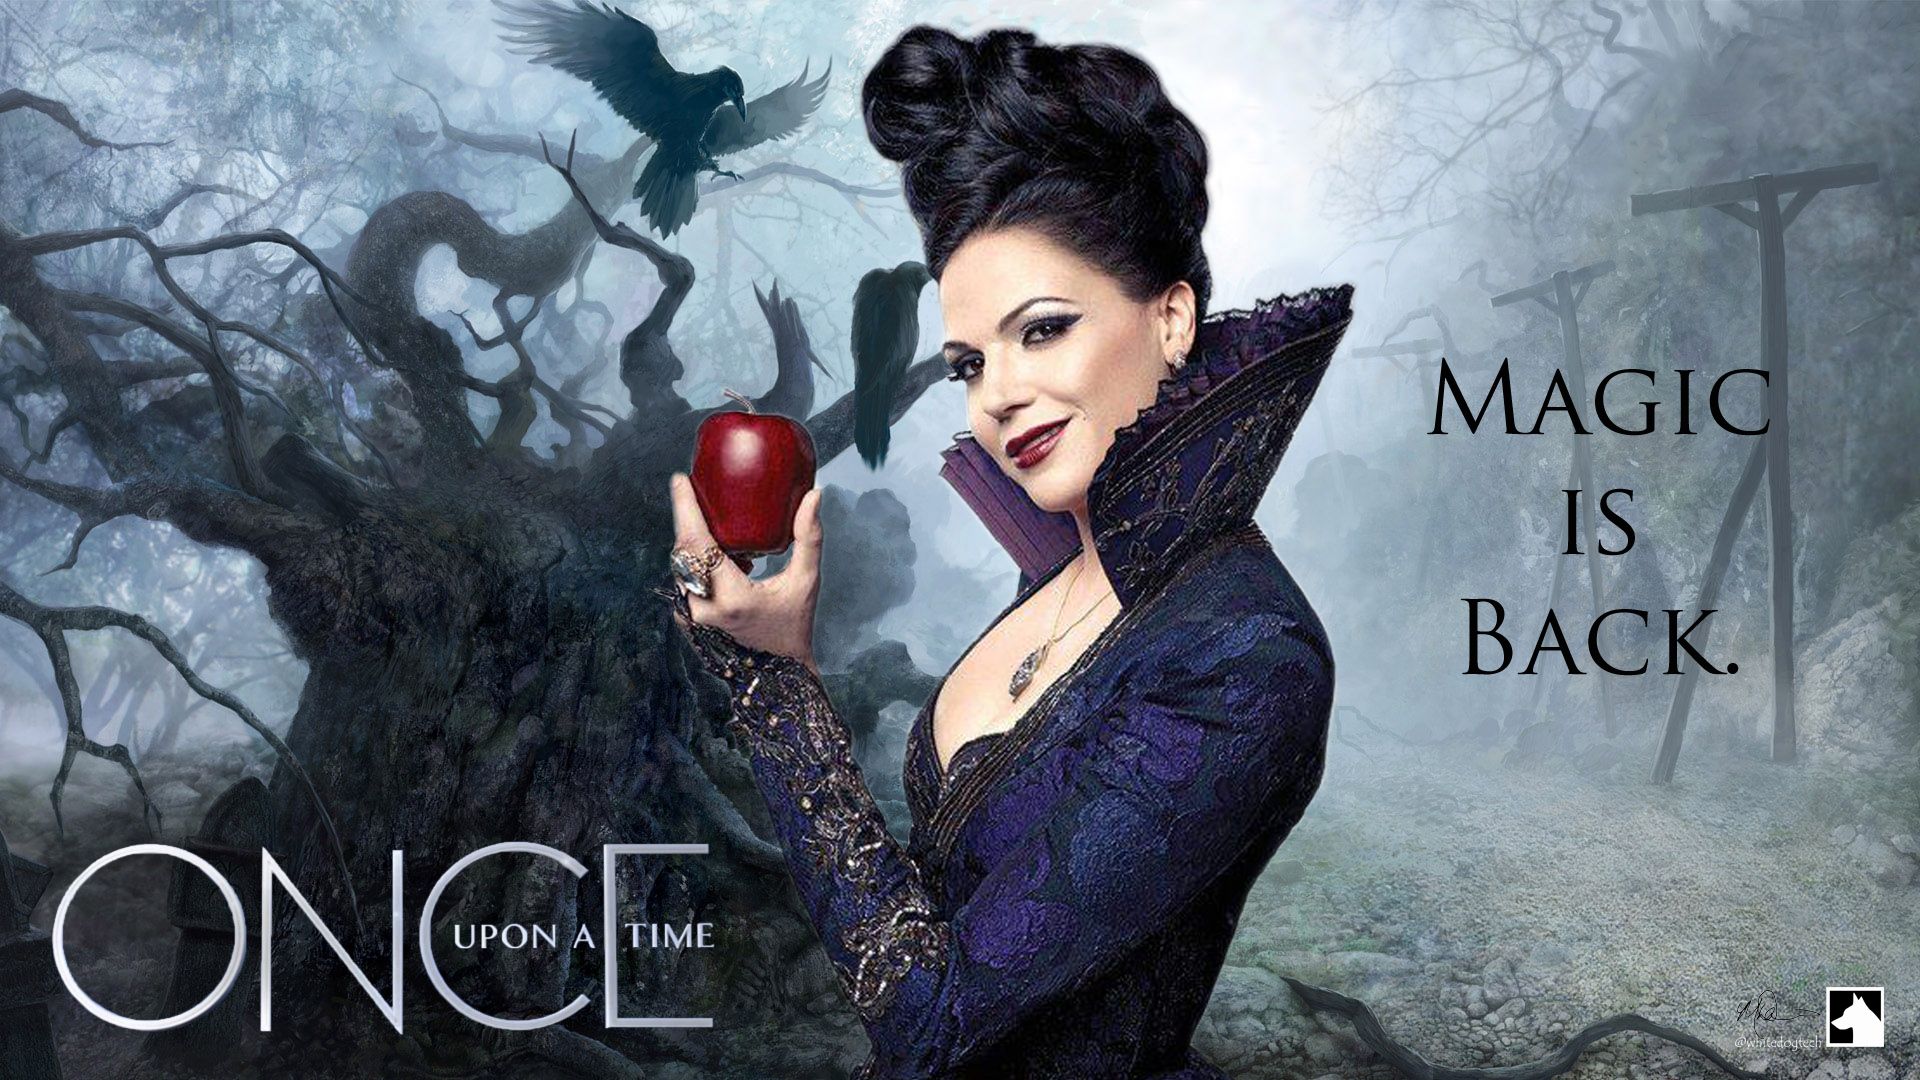 OUAT- Top Cast image. Once upon a time, Evil queen, Ouat